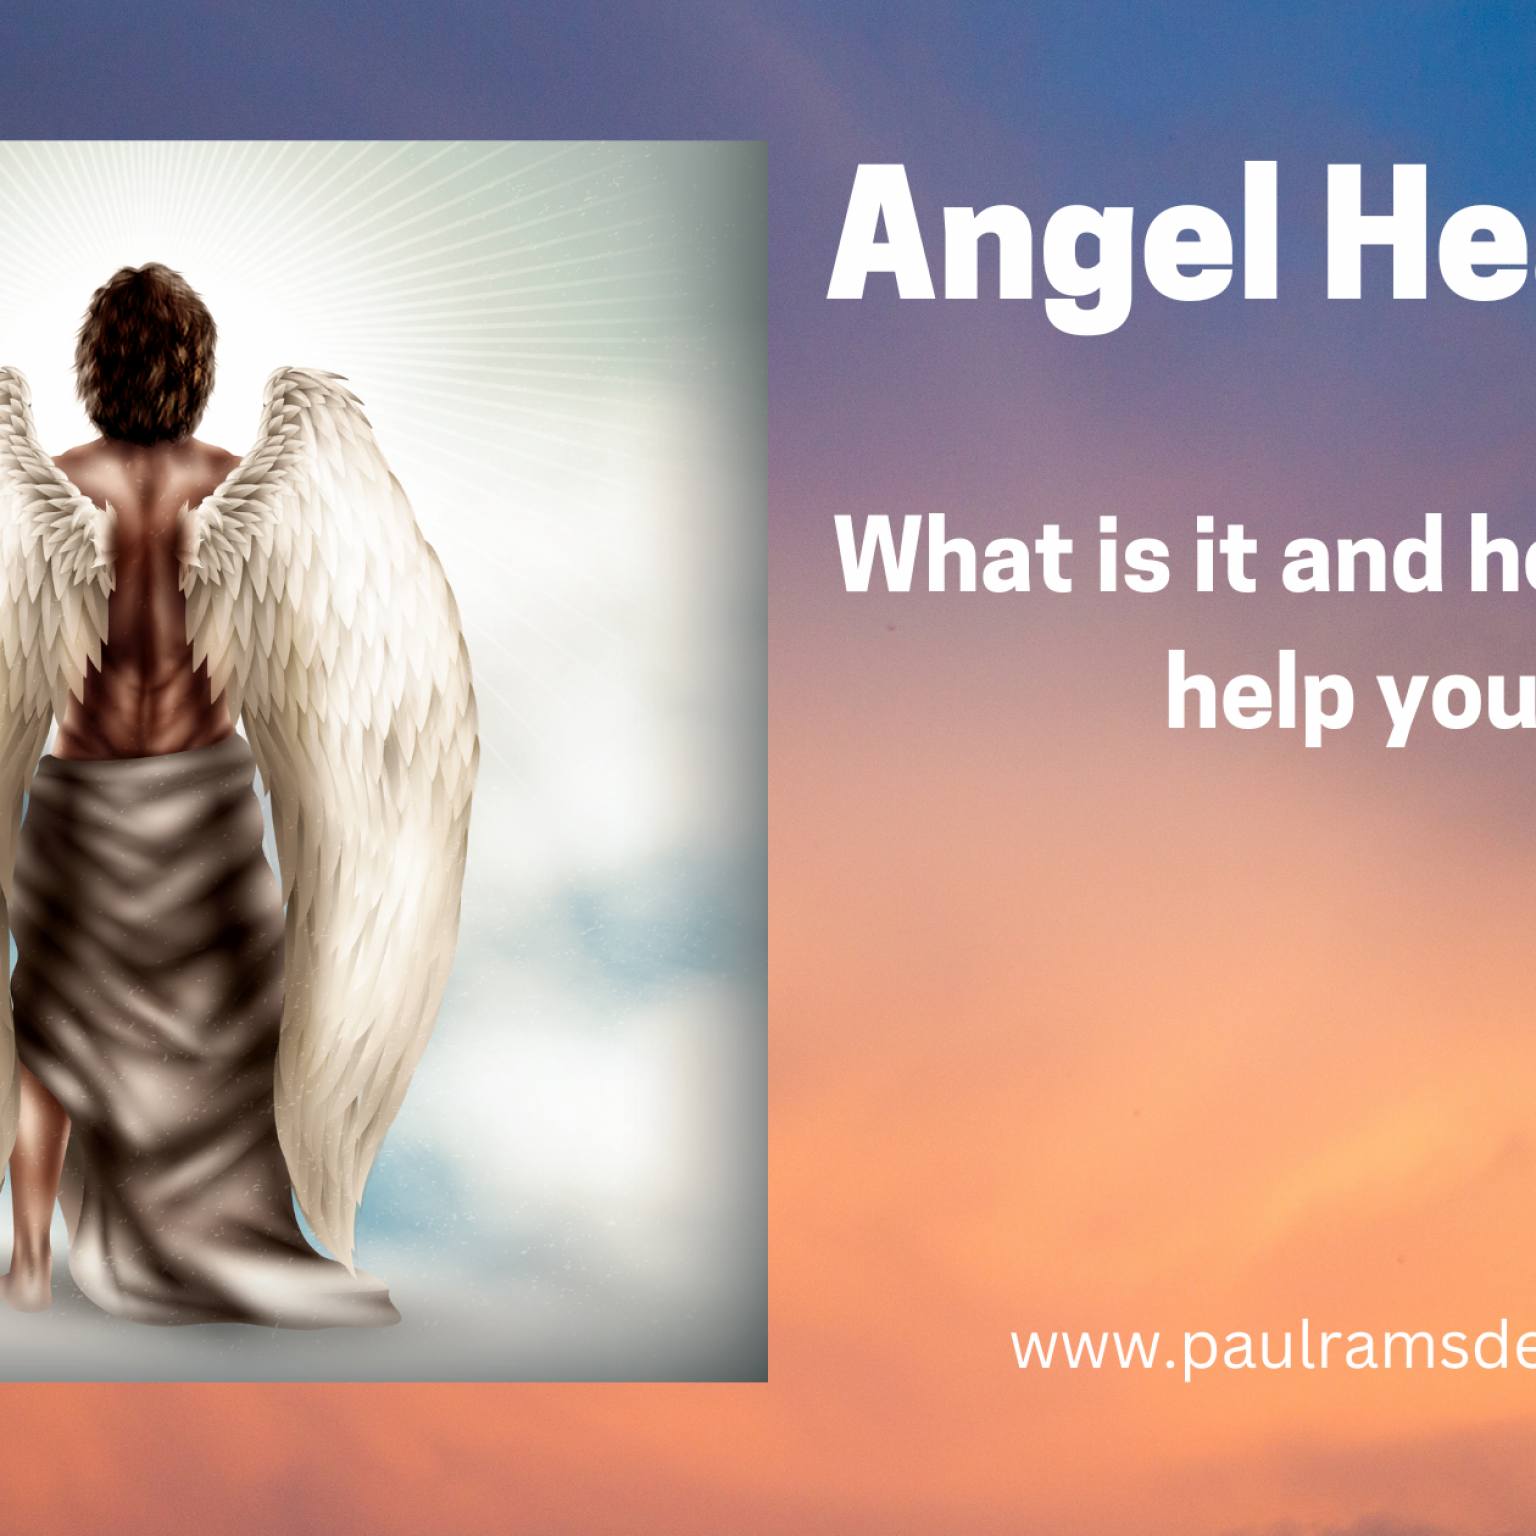 What is Angel Healing and How Can it Help Me